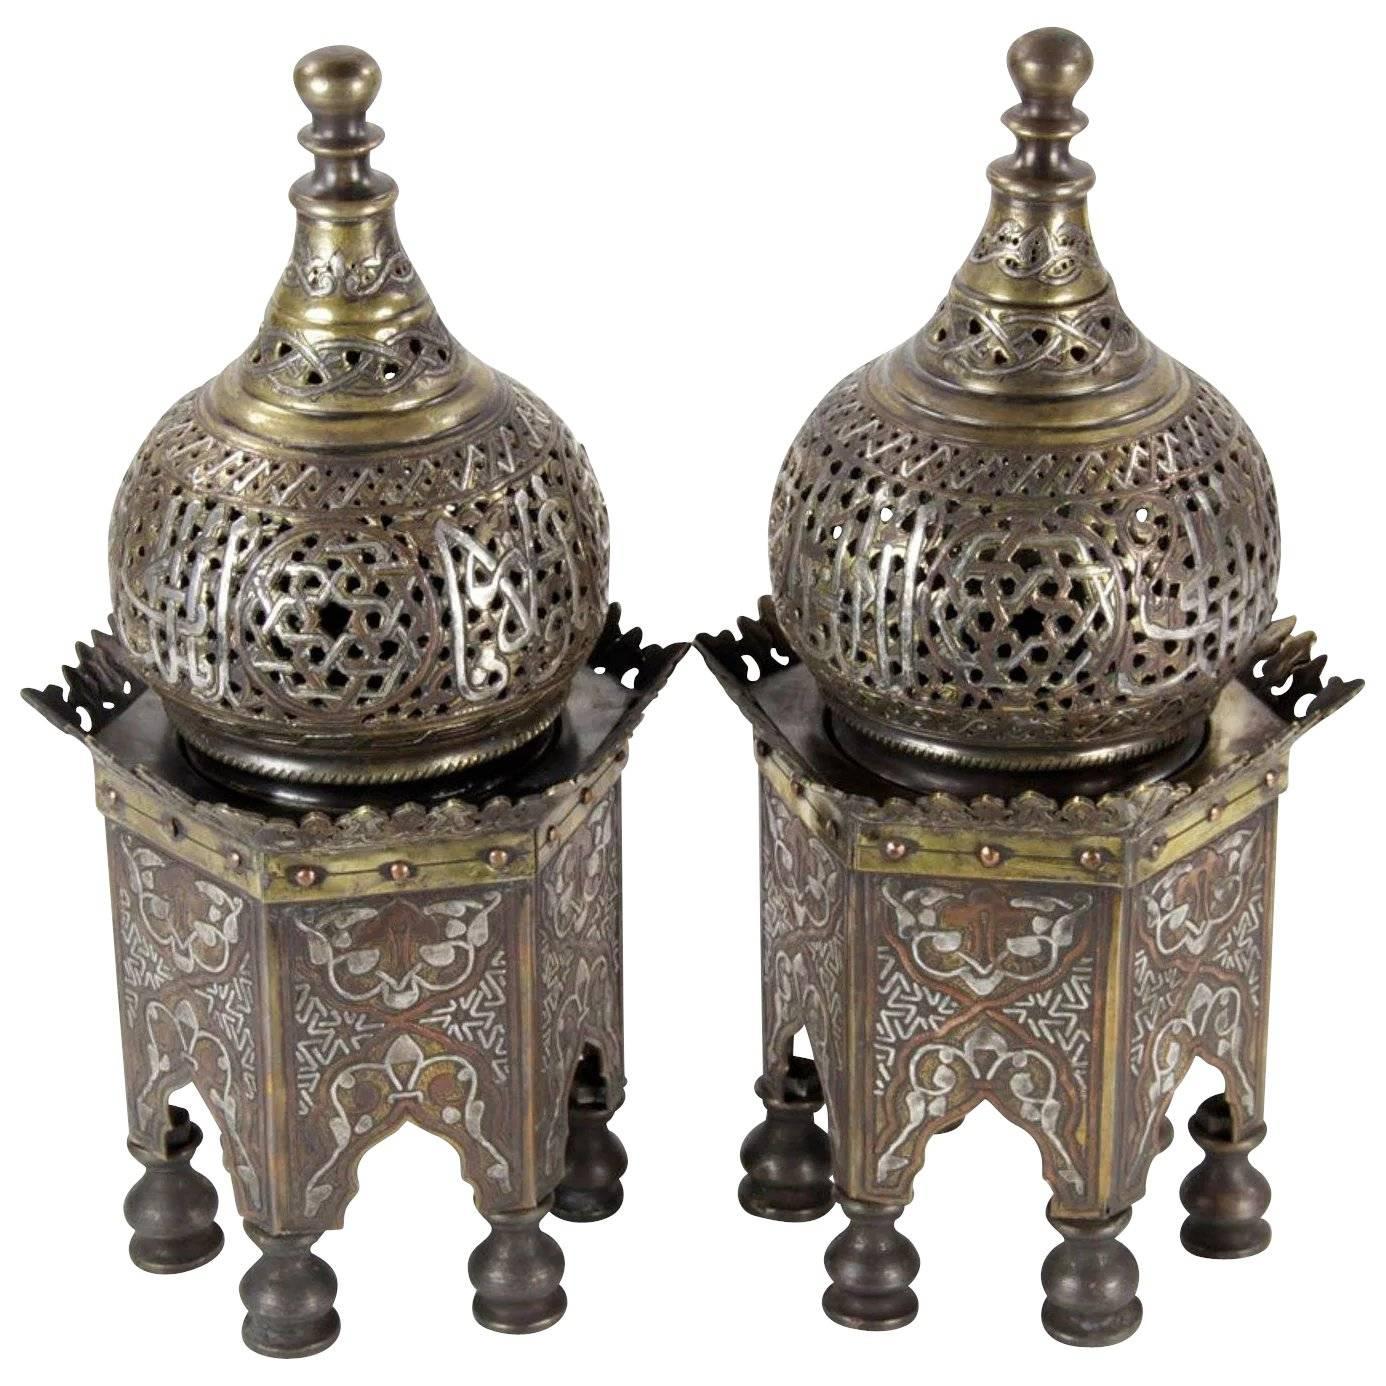 Pair of Middle Eastern Islamic Silver Damascene Inlaid Incense Burners